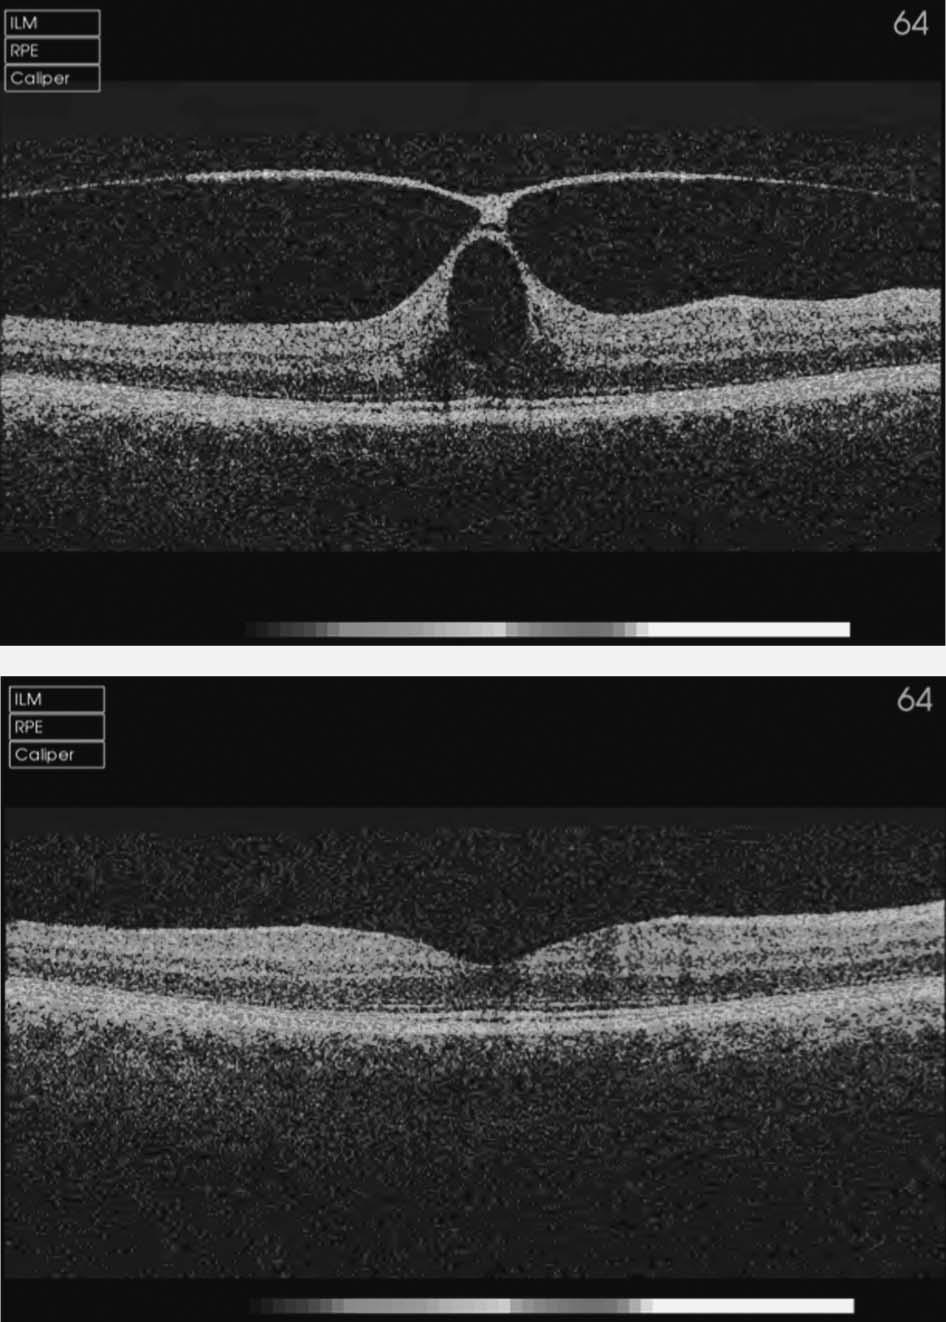 attenuation of the cystic changes at the fovea. VMT syndrome is typically.1,500 mm (or 1 2 disk diameters).